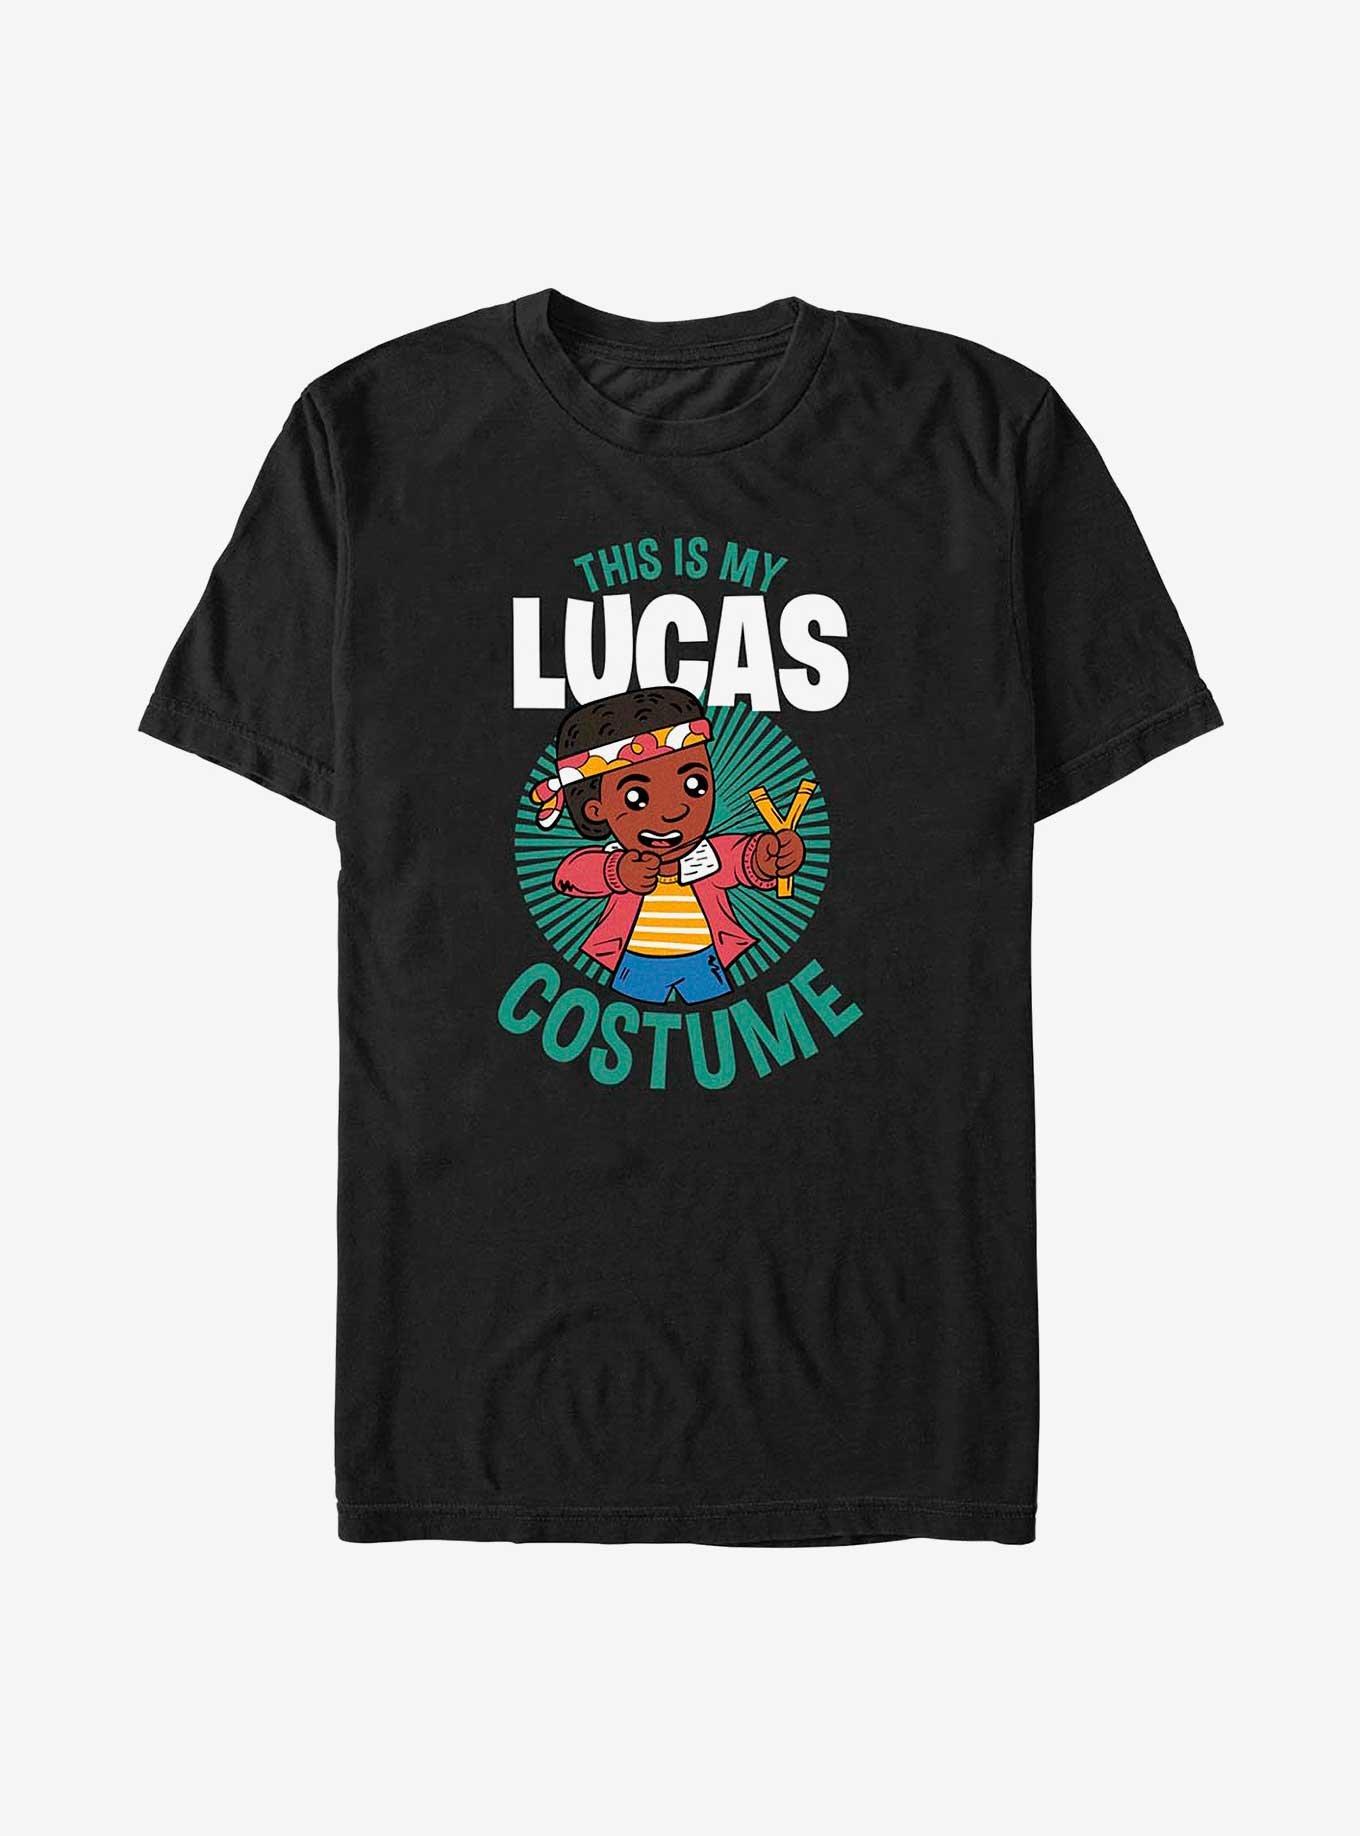 Stranger Things This Is My Lucas Costume T-Shirt, BLACK, hi-res